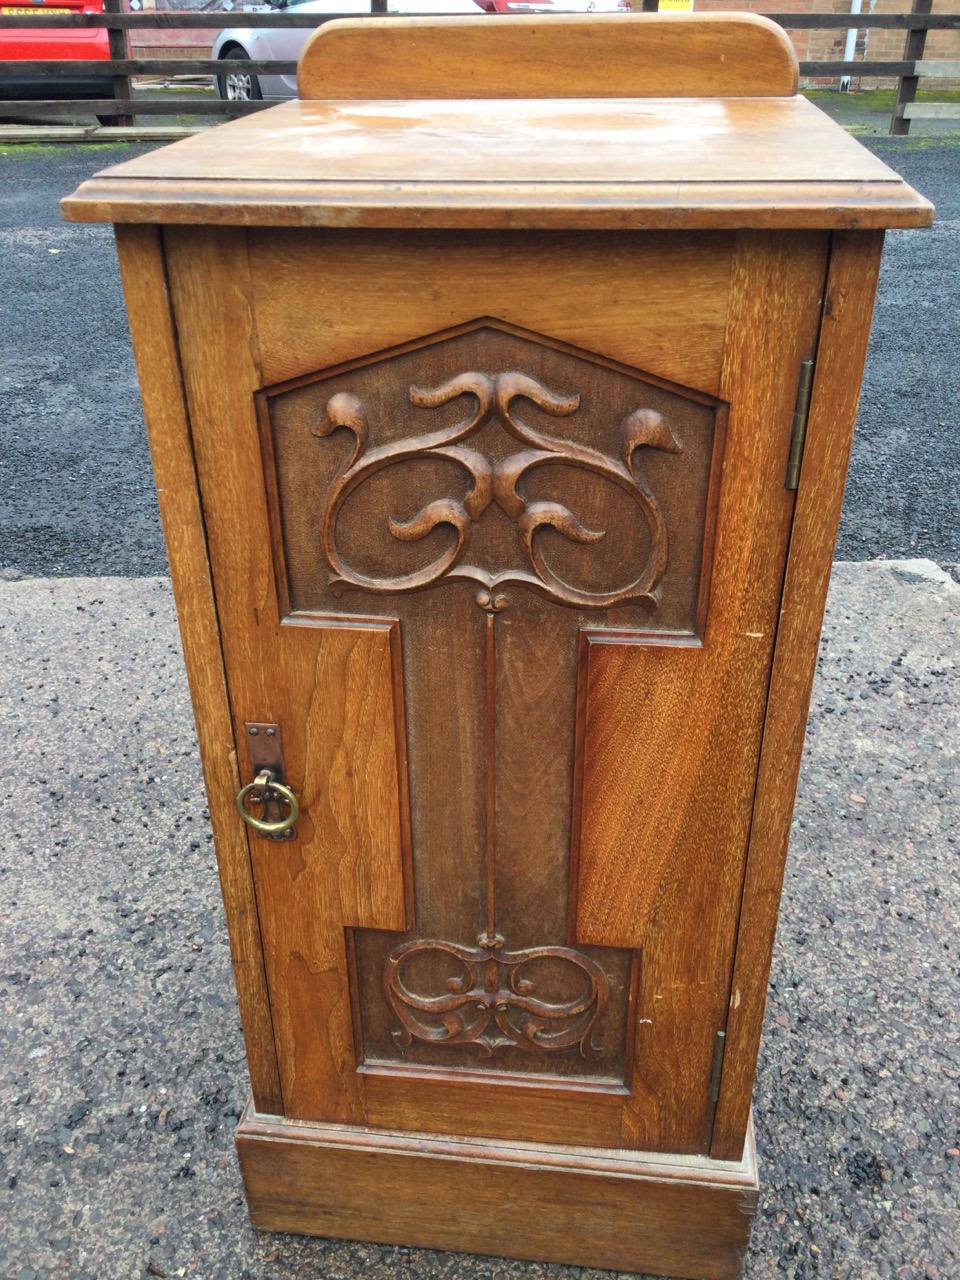 An art nouveau mahogany pot cupboard with moulded top above a scroll carved panelled door mounted - Image 2 of 3